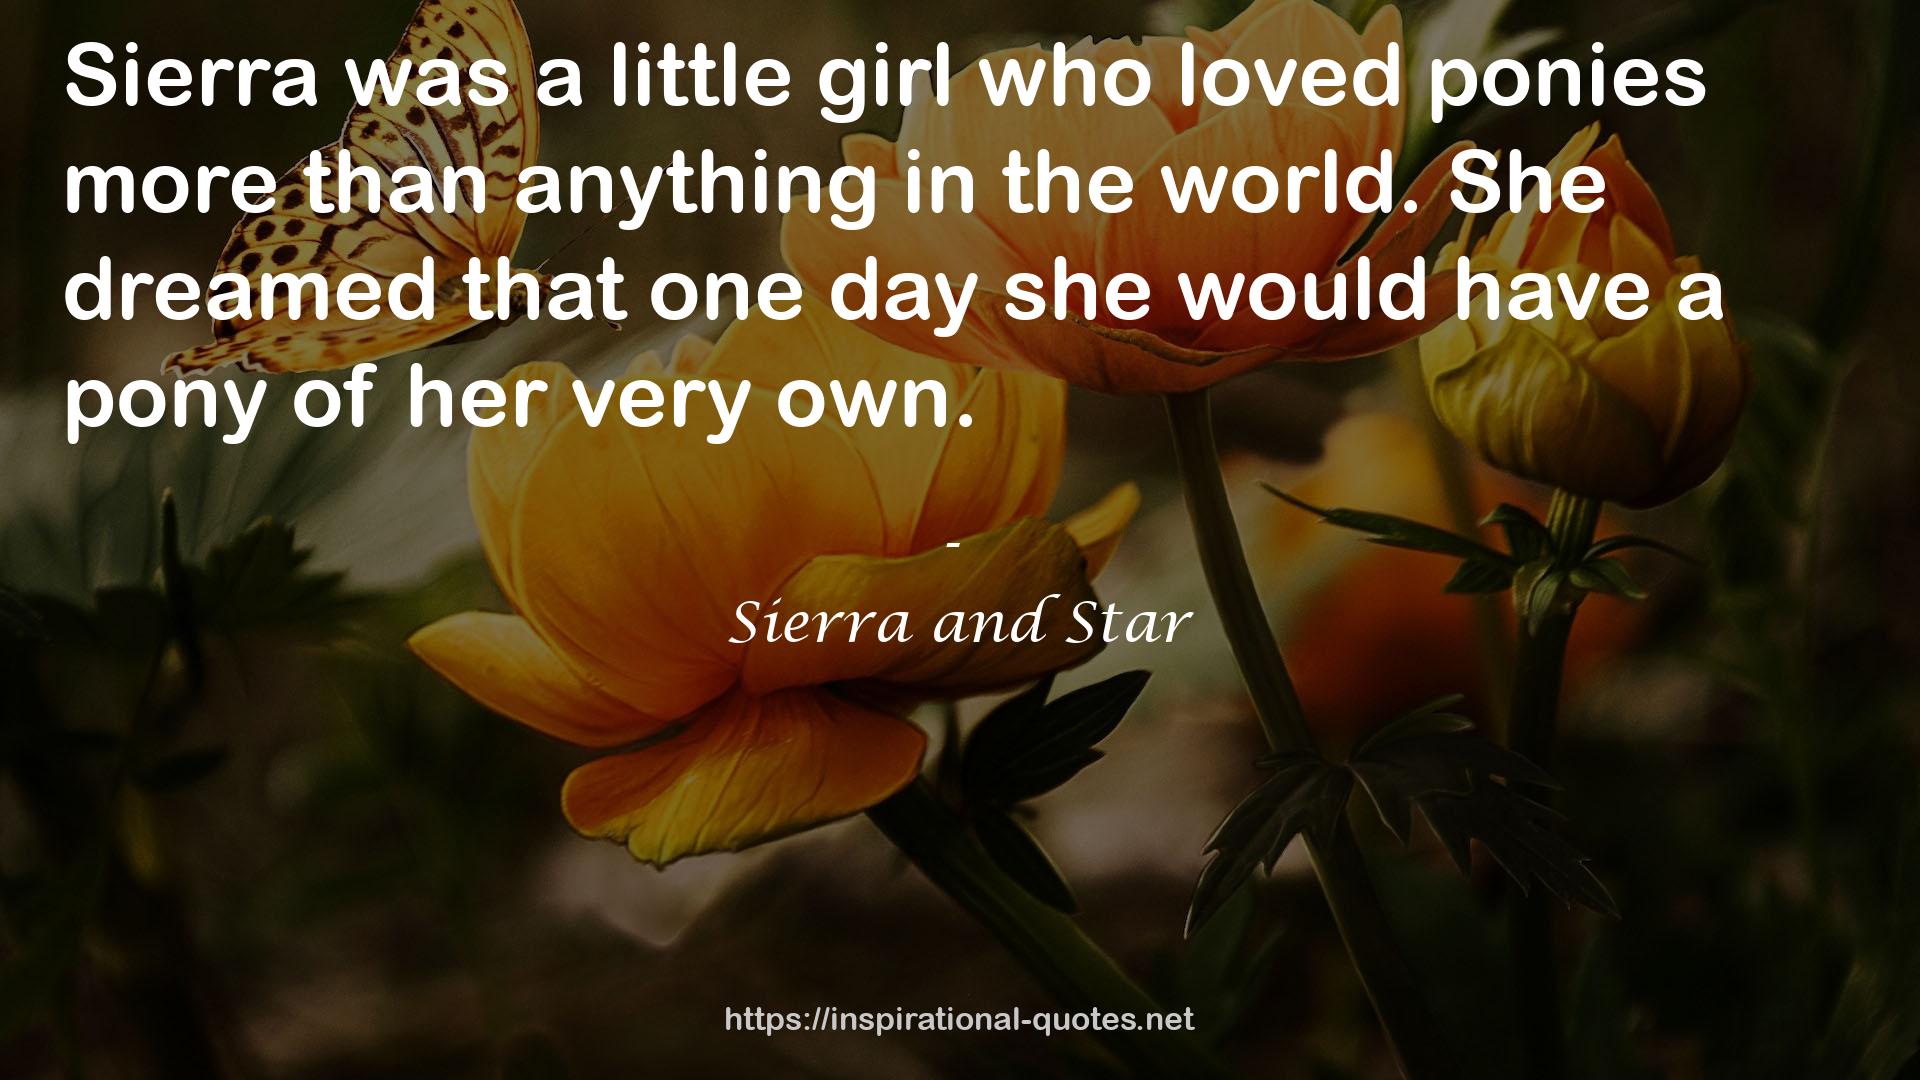 Sierra and Star QUOTES